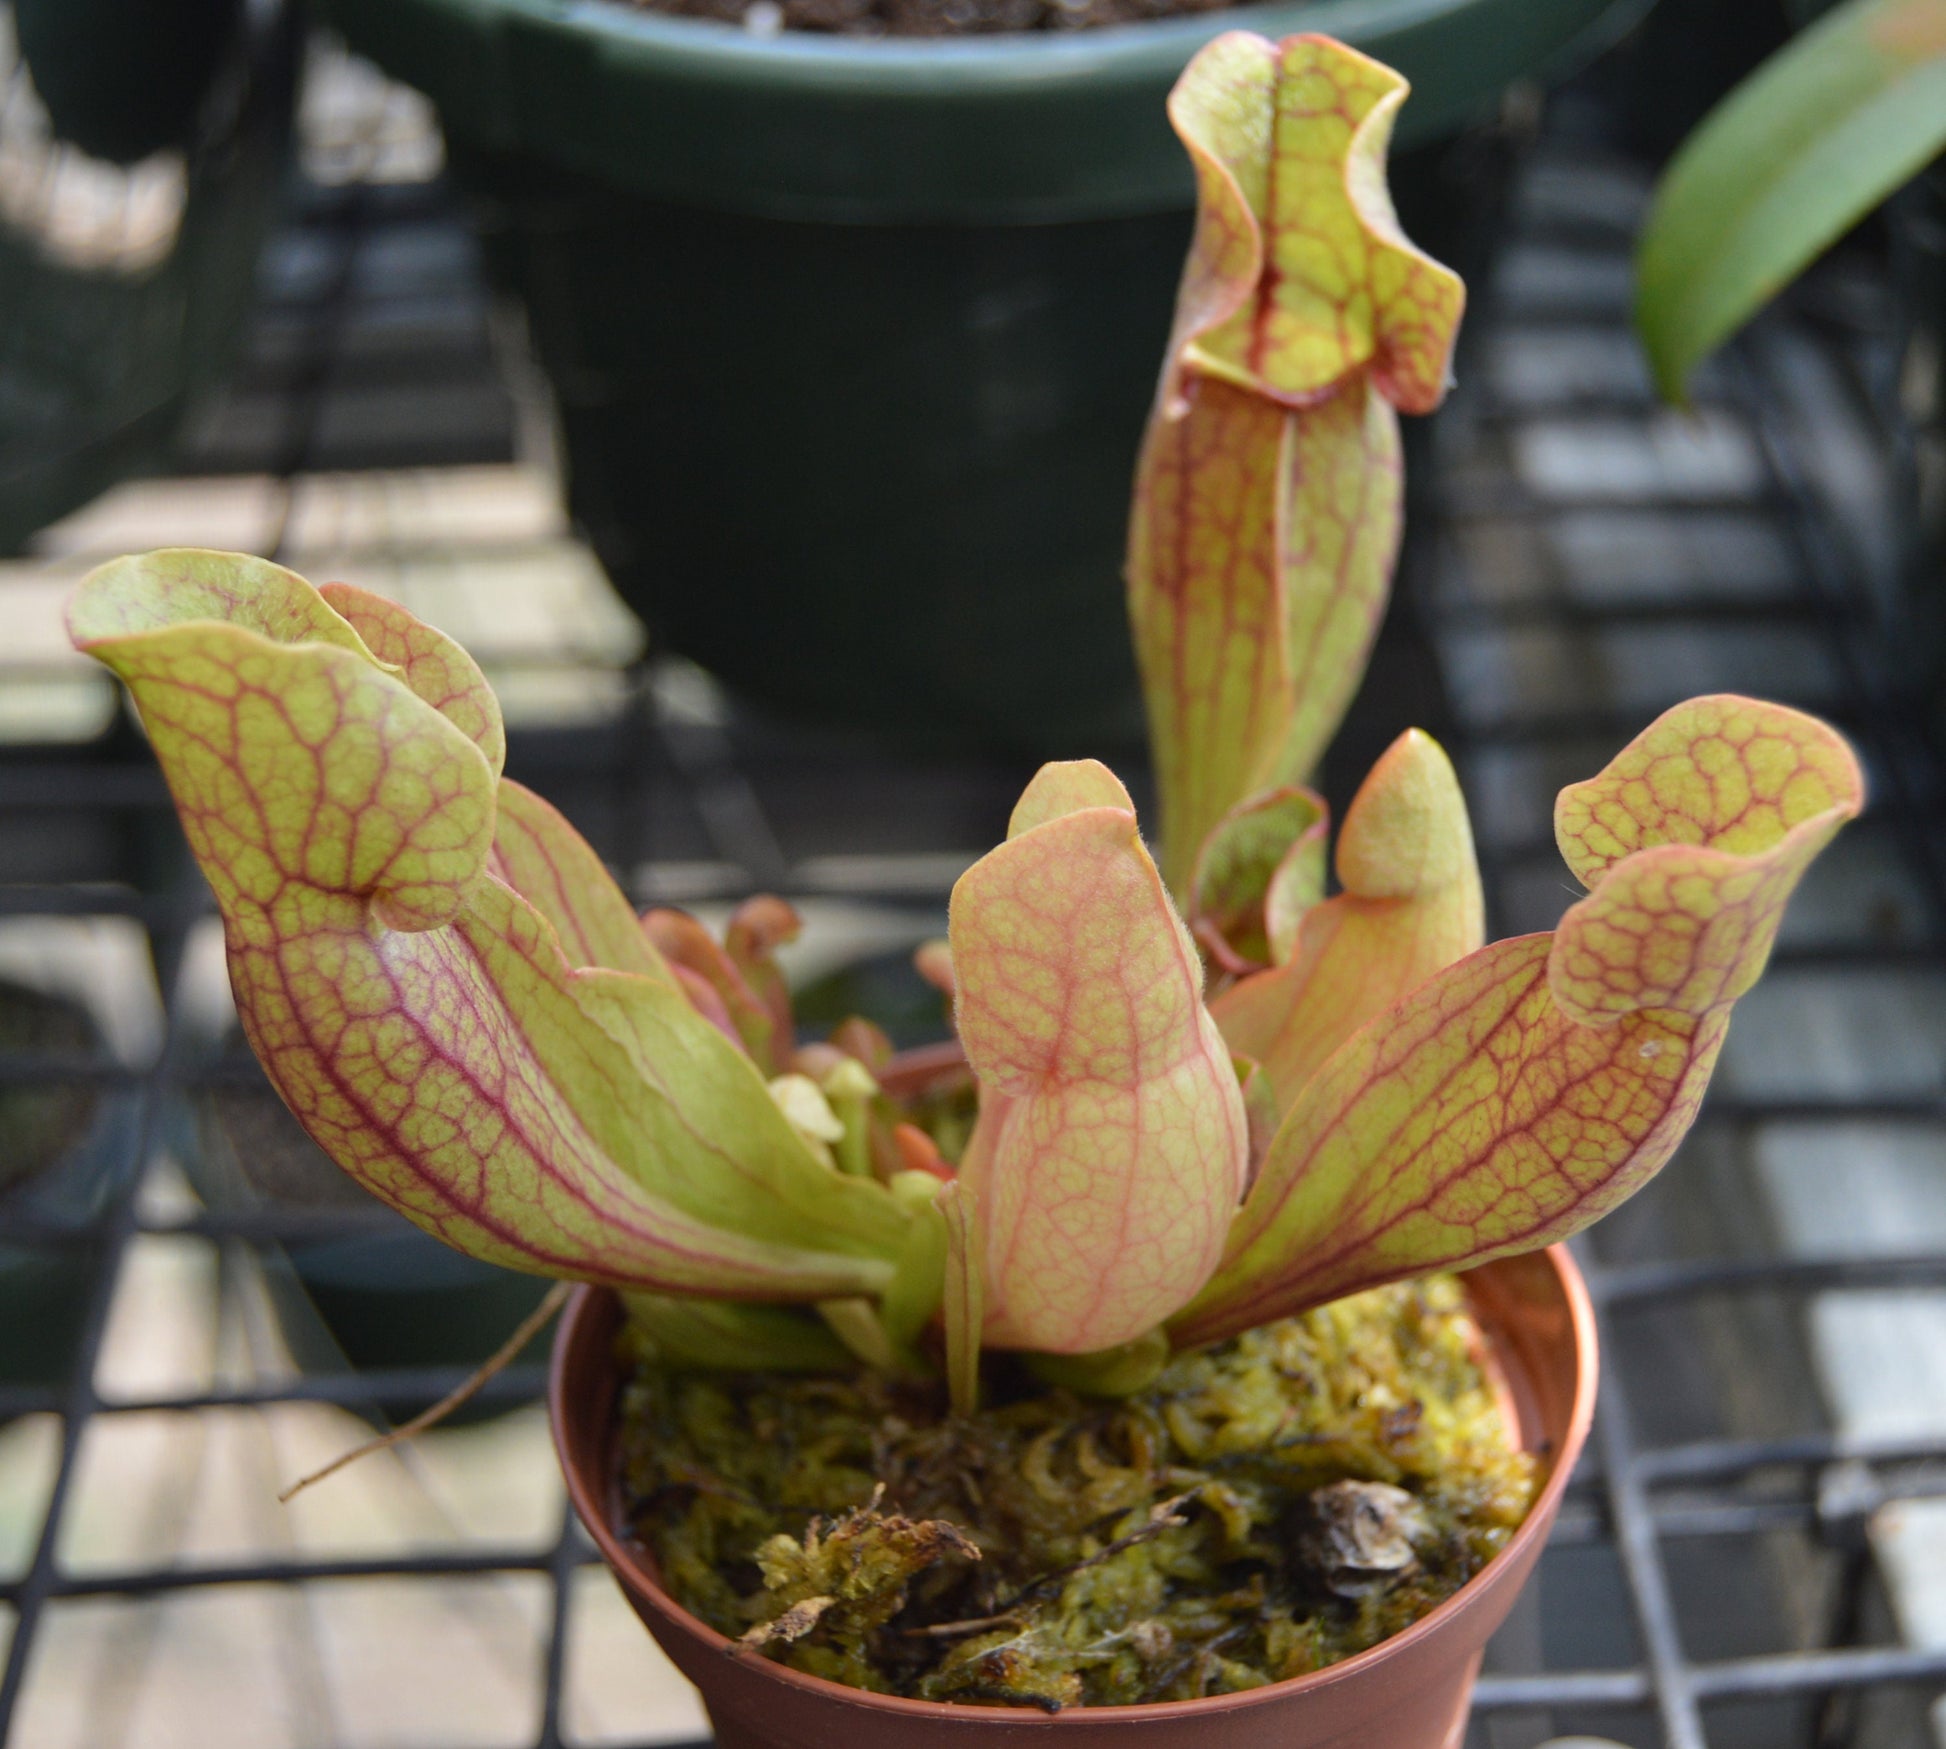 sarracenia purpurea can be grown in partial shade to full sun where the pitchers will turn from a green with red veins to a deep red/purple color they are in 3 inch pots